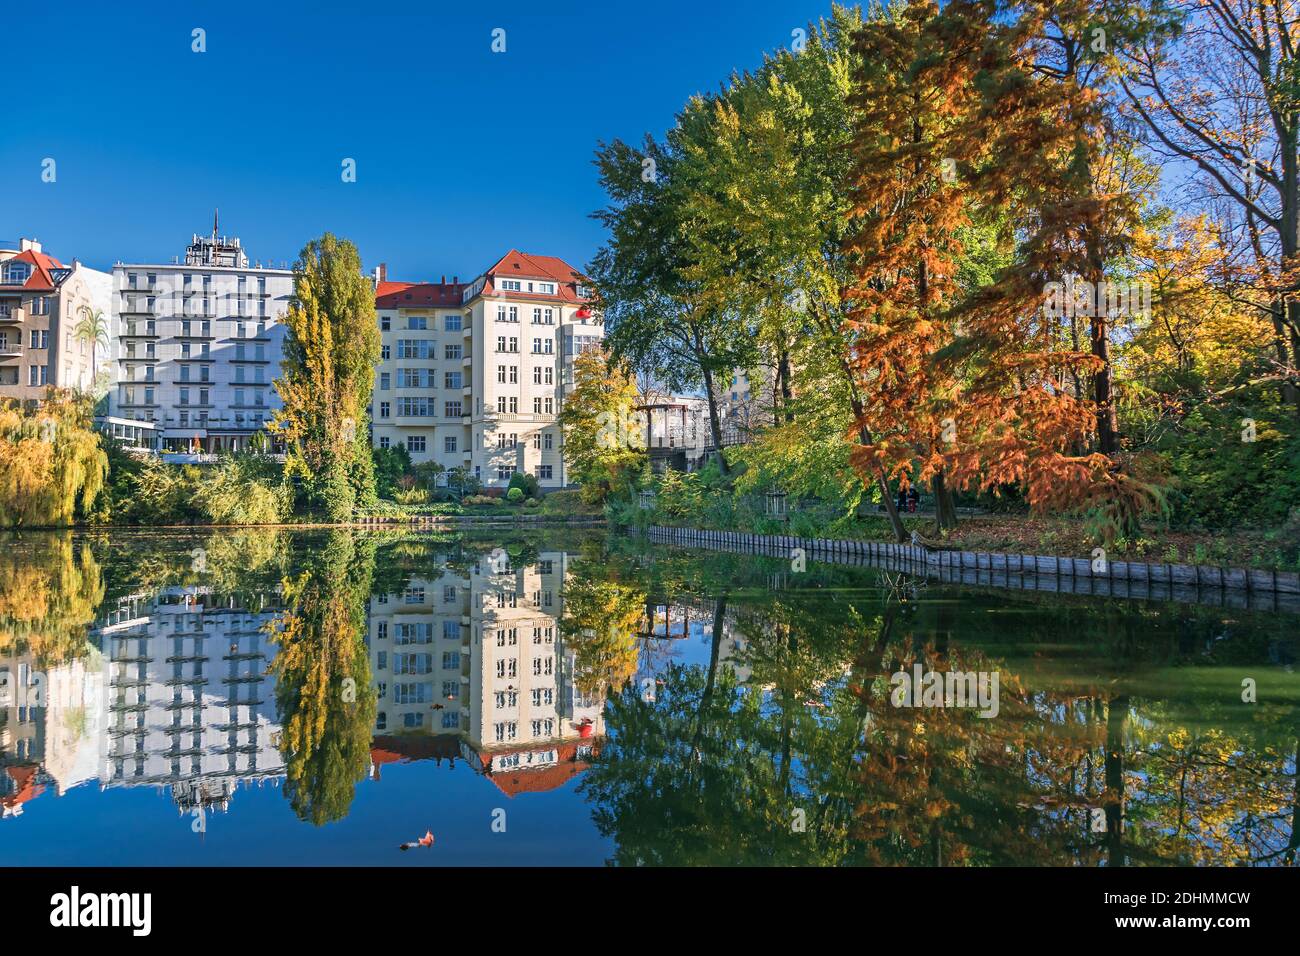 Berlin, Germany - November 7, 2020: Shore of Lake Lietzen with buildings of Ringhotel Seehof reflecting in the water and the Lake Lietzen bridge over Stock Photo